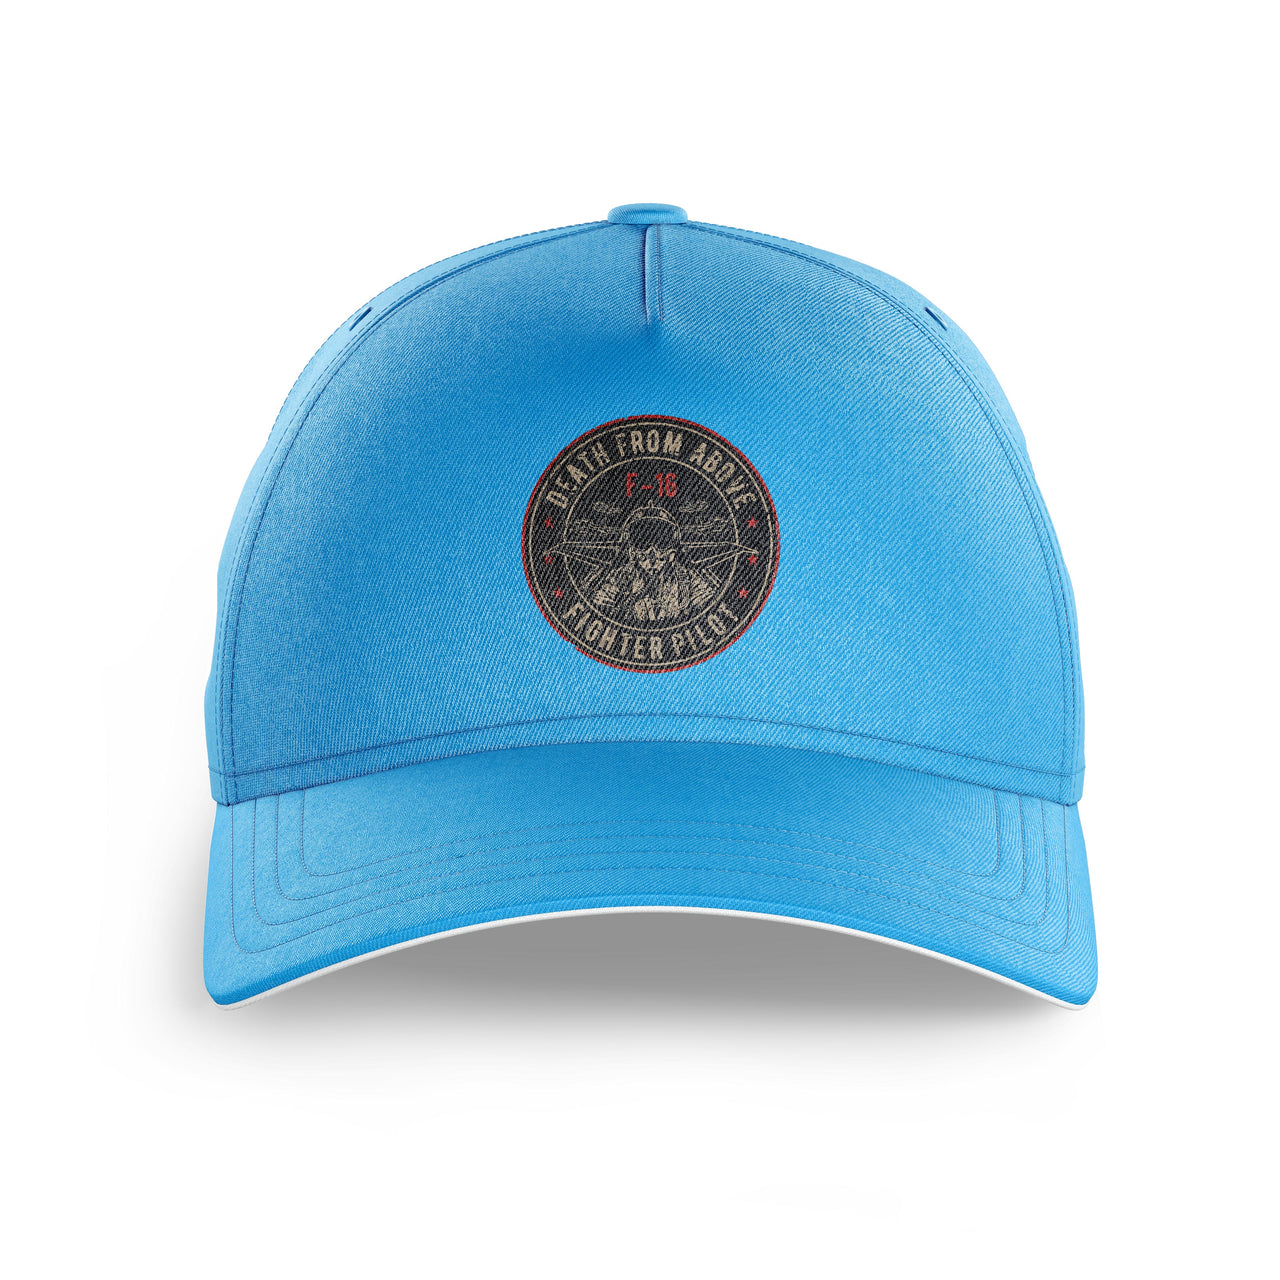 Fighting Falcon F16 - Death From Above Printed Hats